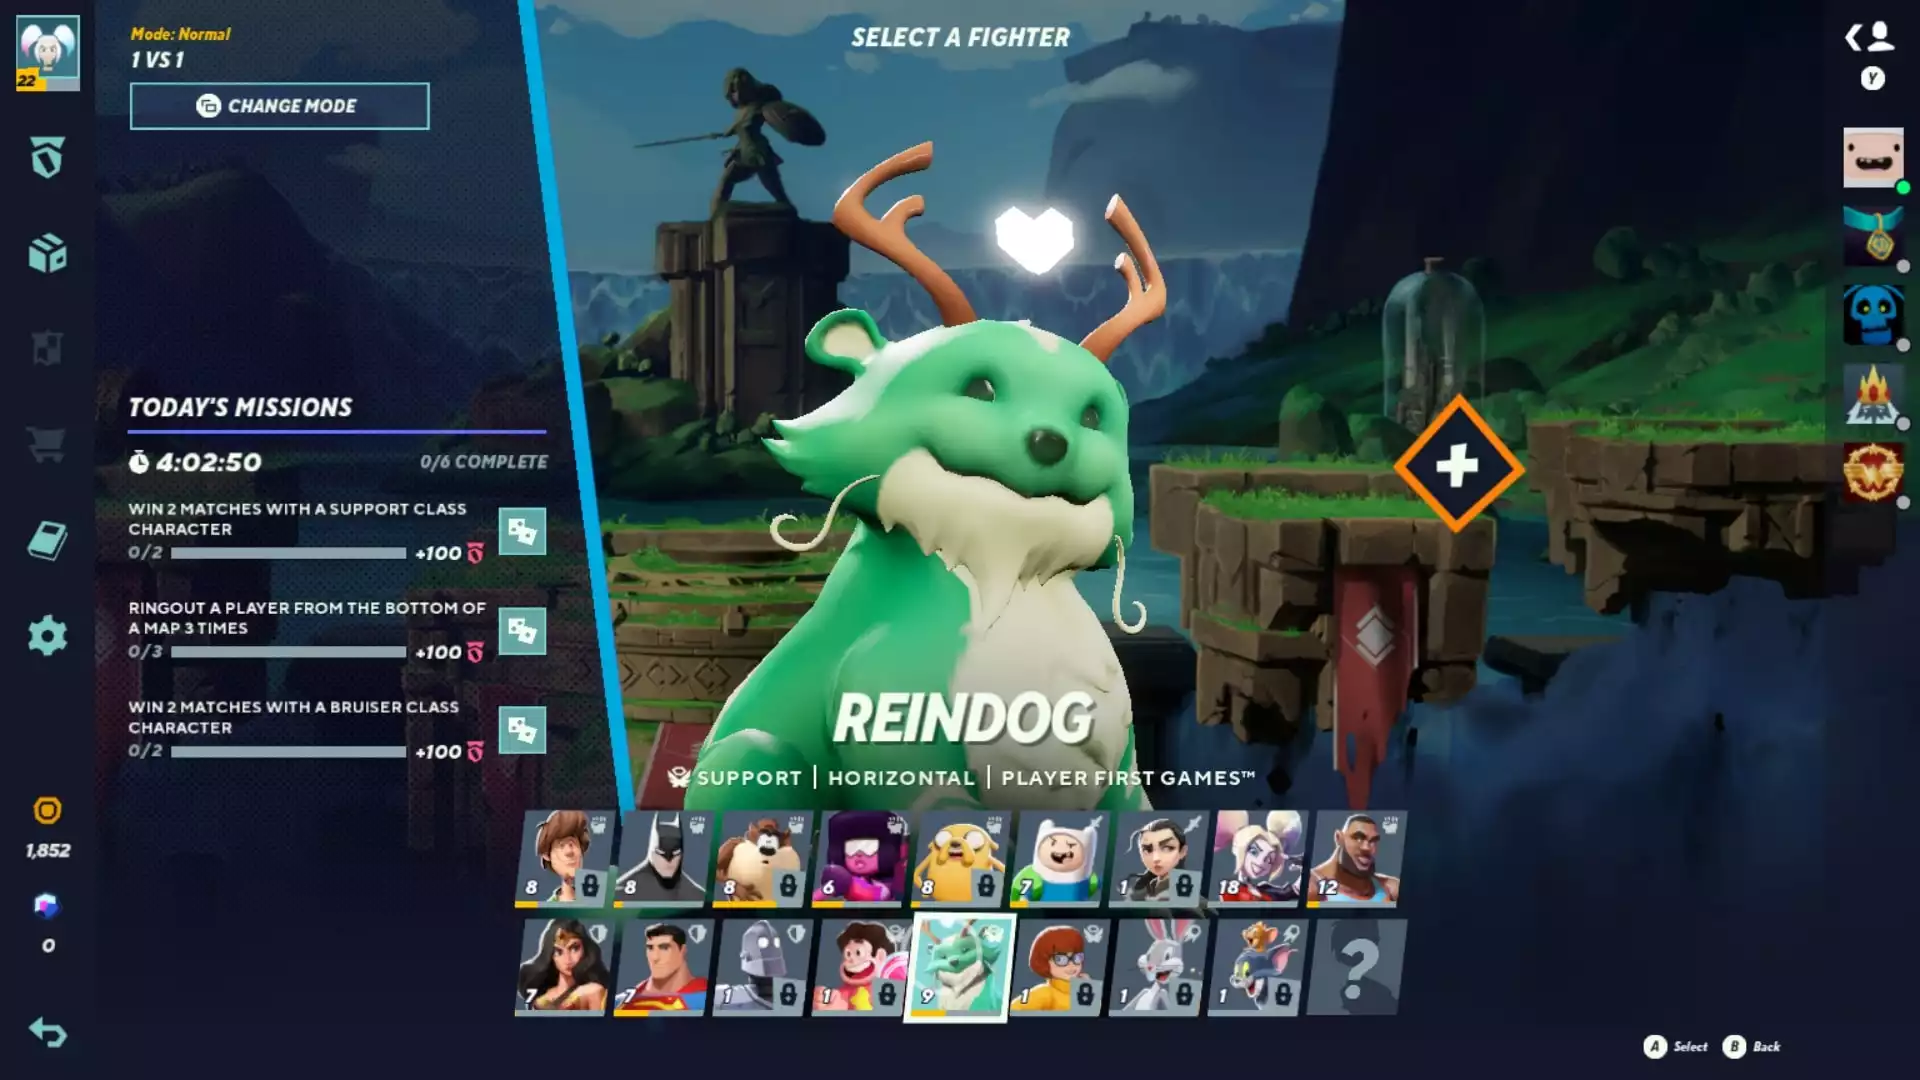 MultiVersus Reindog Guide: Combos, Perks, Specials, And More